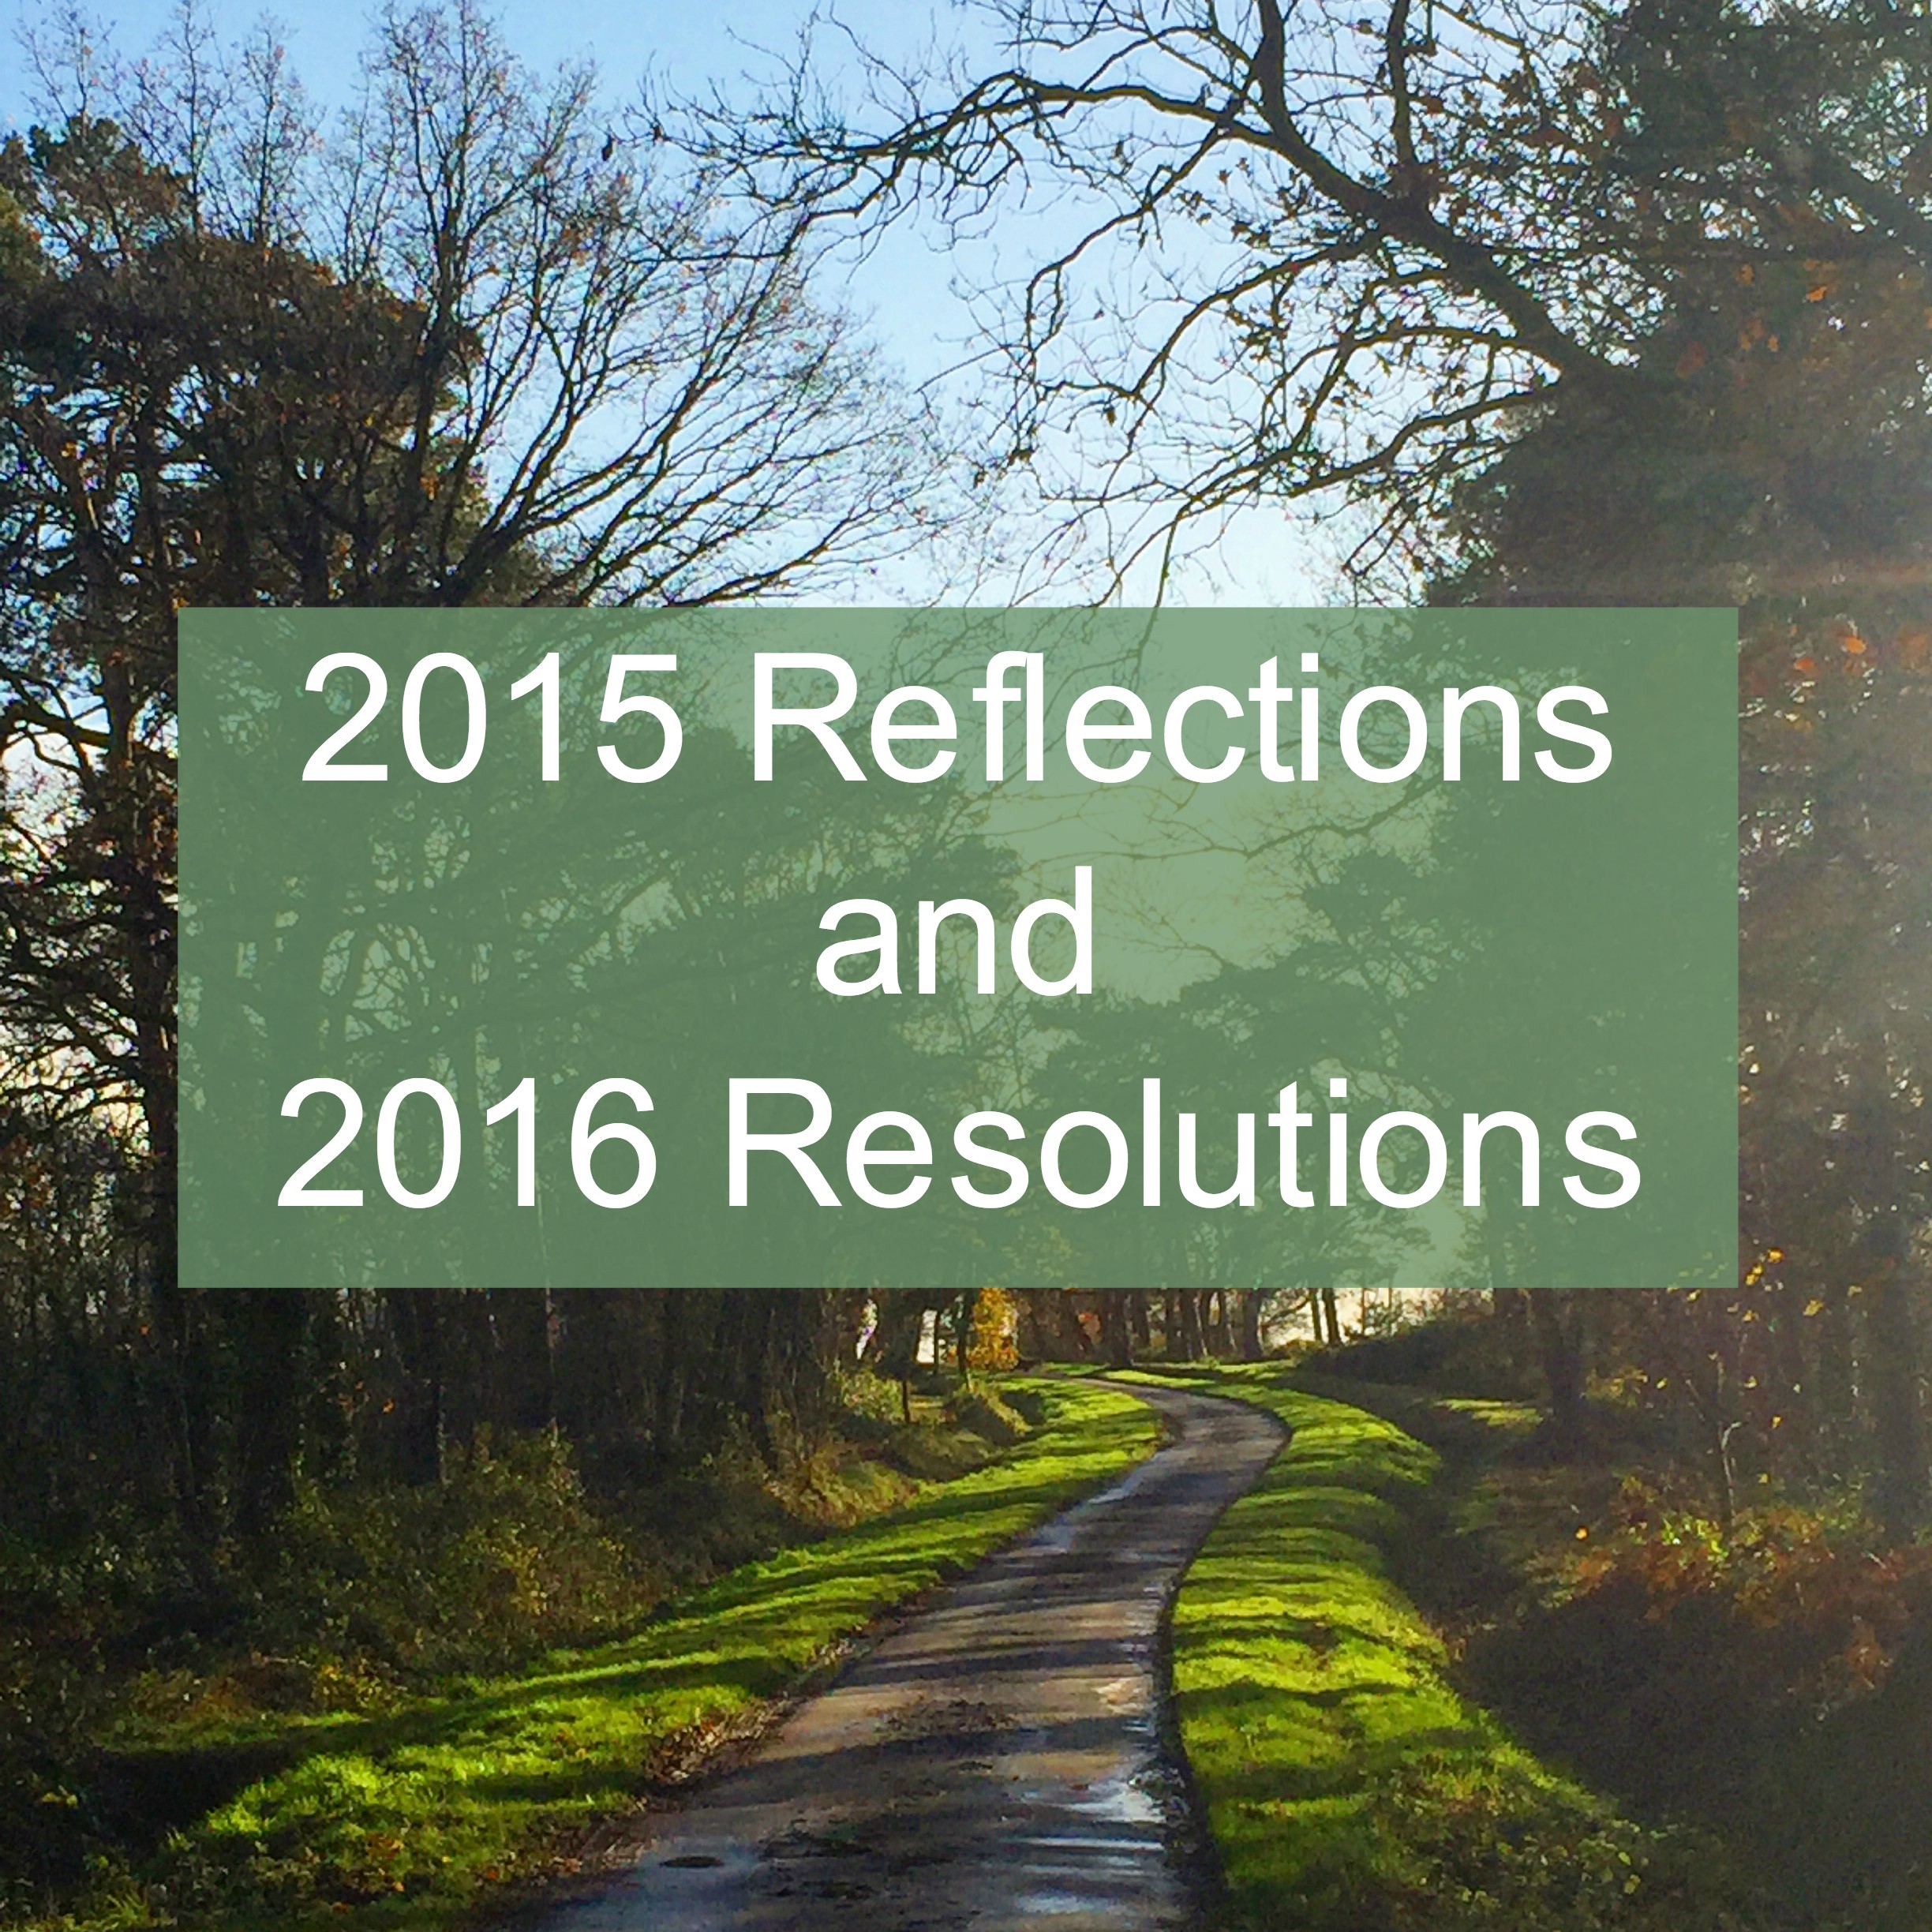 2015 reflections, 2016 resolutions and a competition